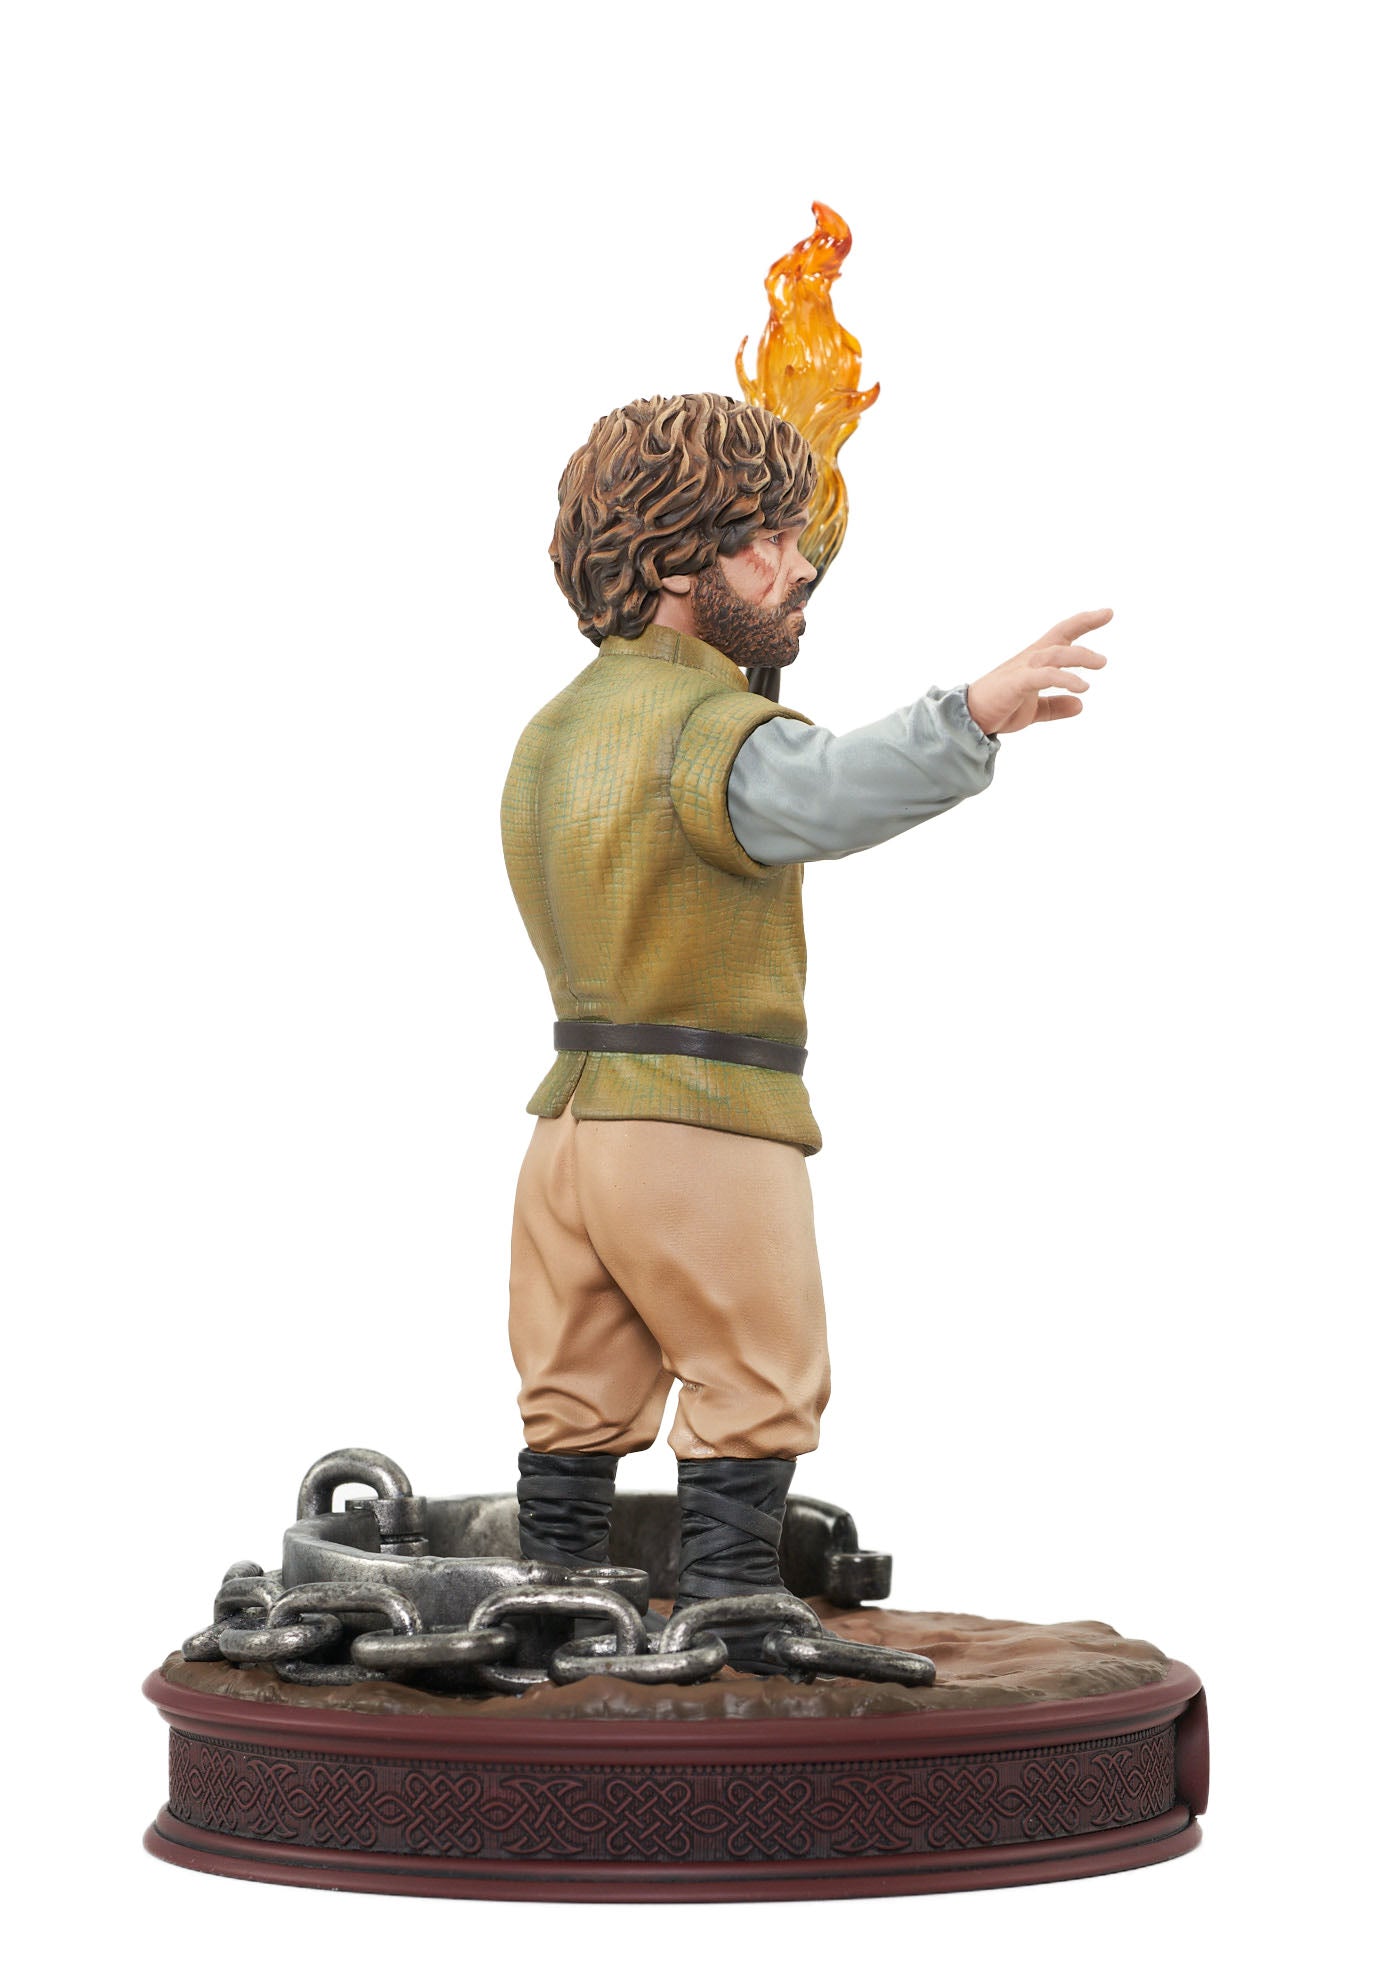 Game of Thrones Gallery Tyrion Lannister PVC Statue